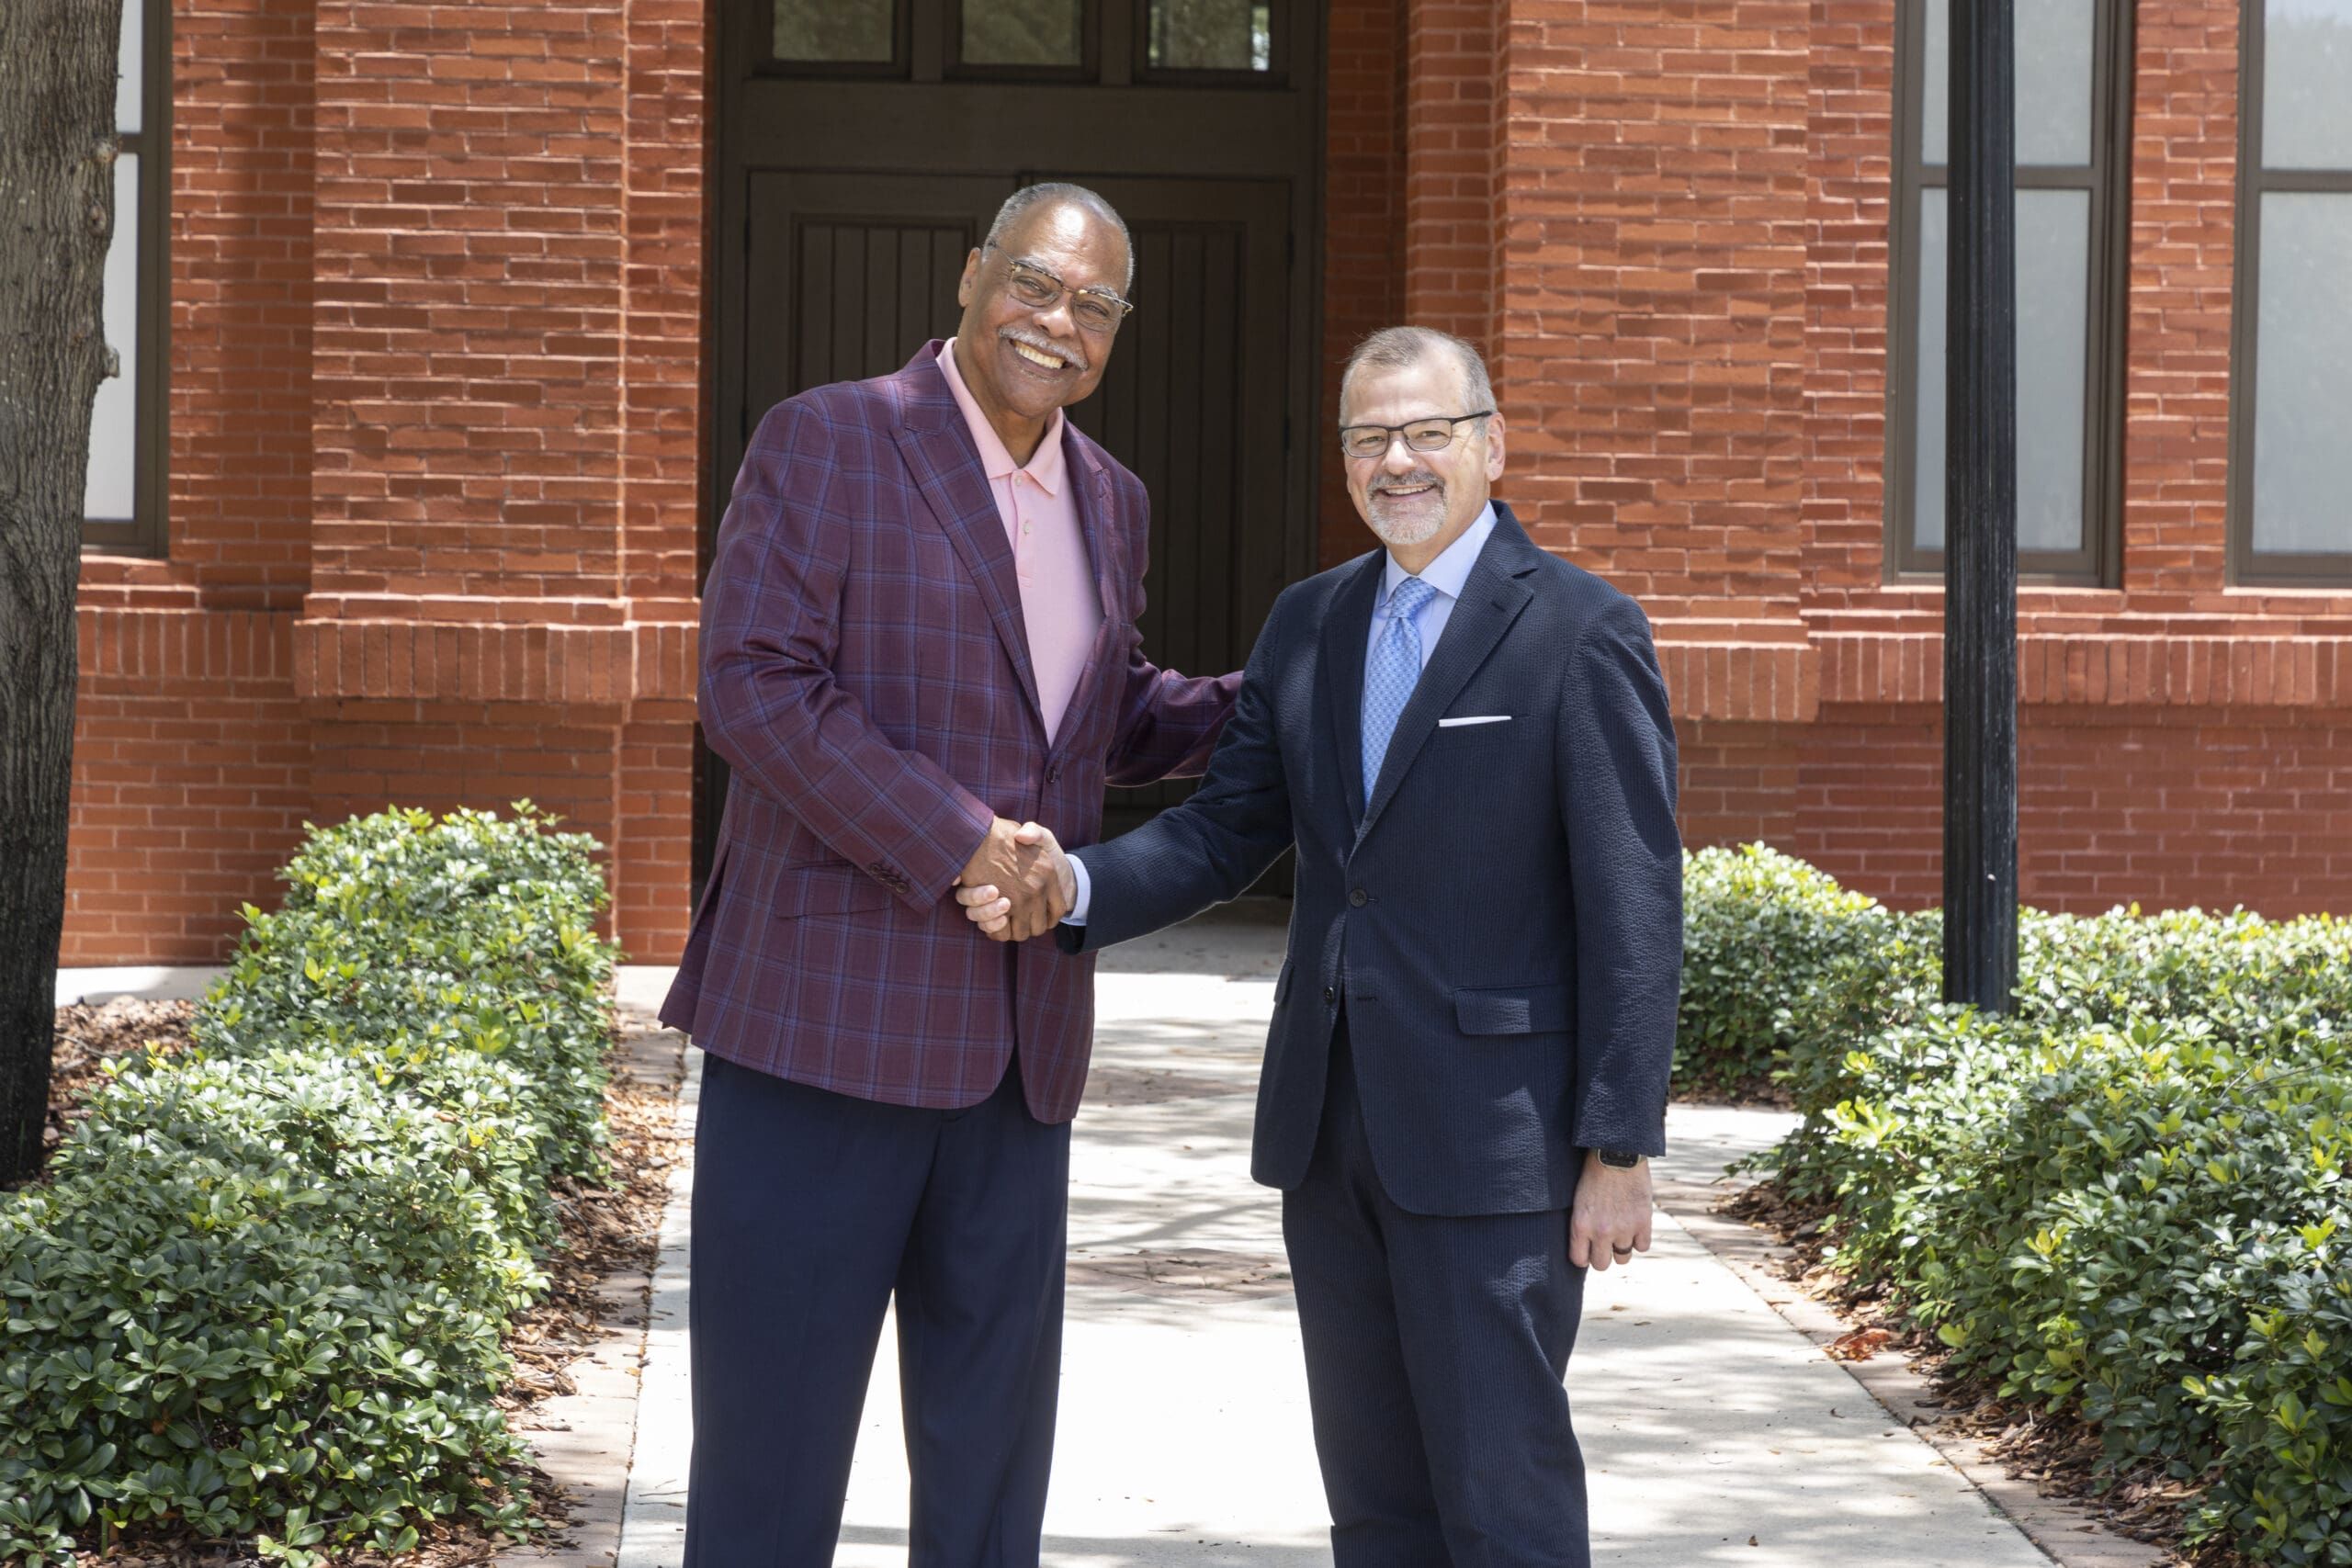 Jerome Ryans (left), President and CEO, Tampa Housing Authority, and C.J. Roberts, Frank E. Duckwall President and CEO of the Tampa Bay History Center greet each other in front of the future home of Tampa’s Black History Museum at Encore. The future museum’s new address is 1213 N. Central Ave. Tampa, Fla. (Photo by Kerrick Williams)